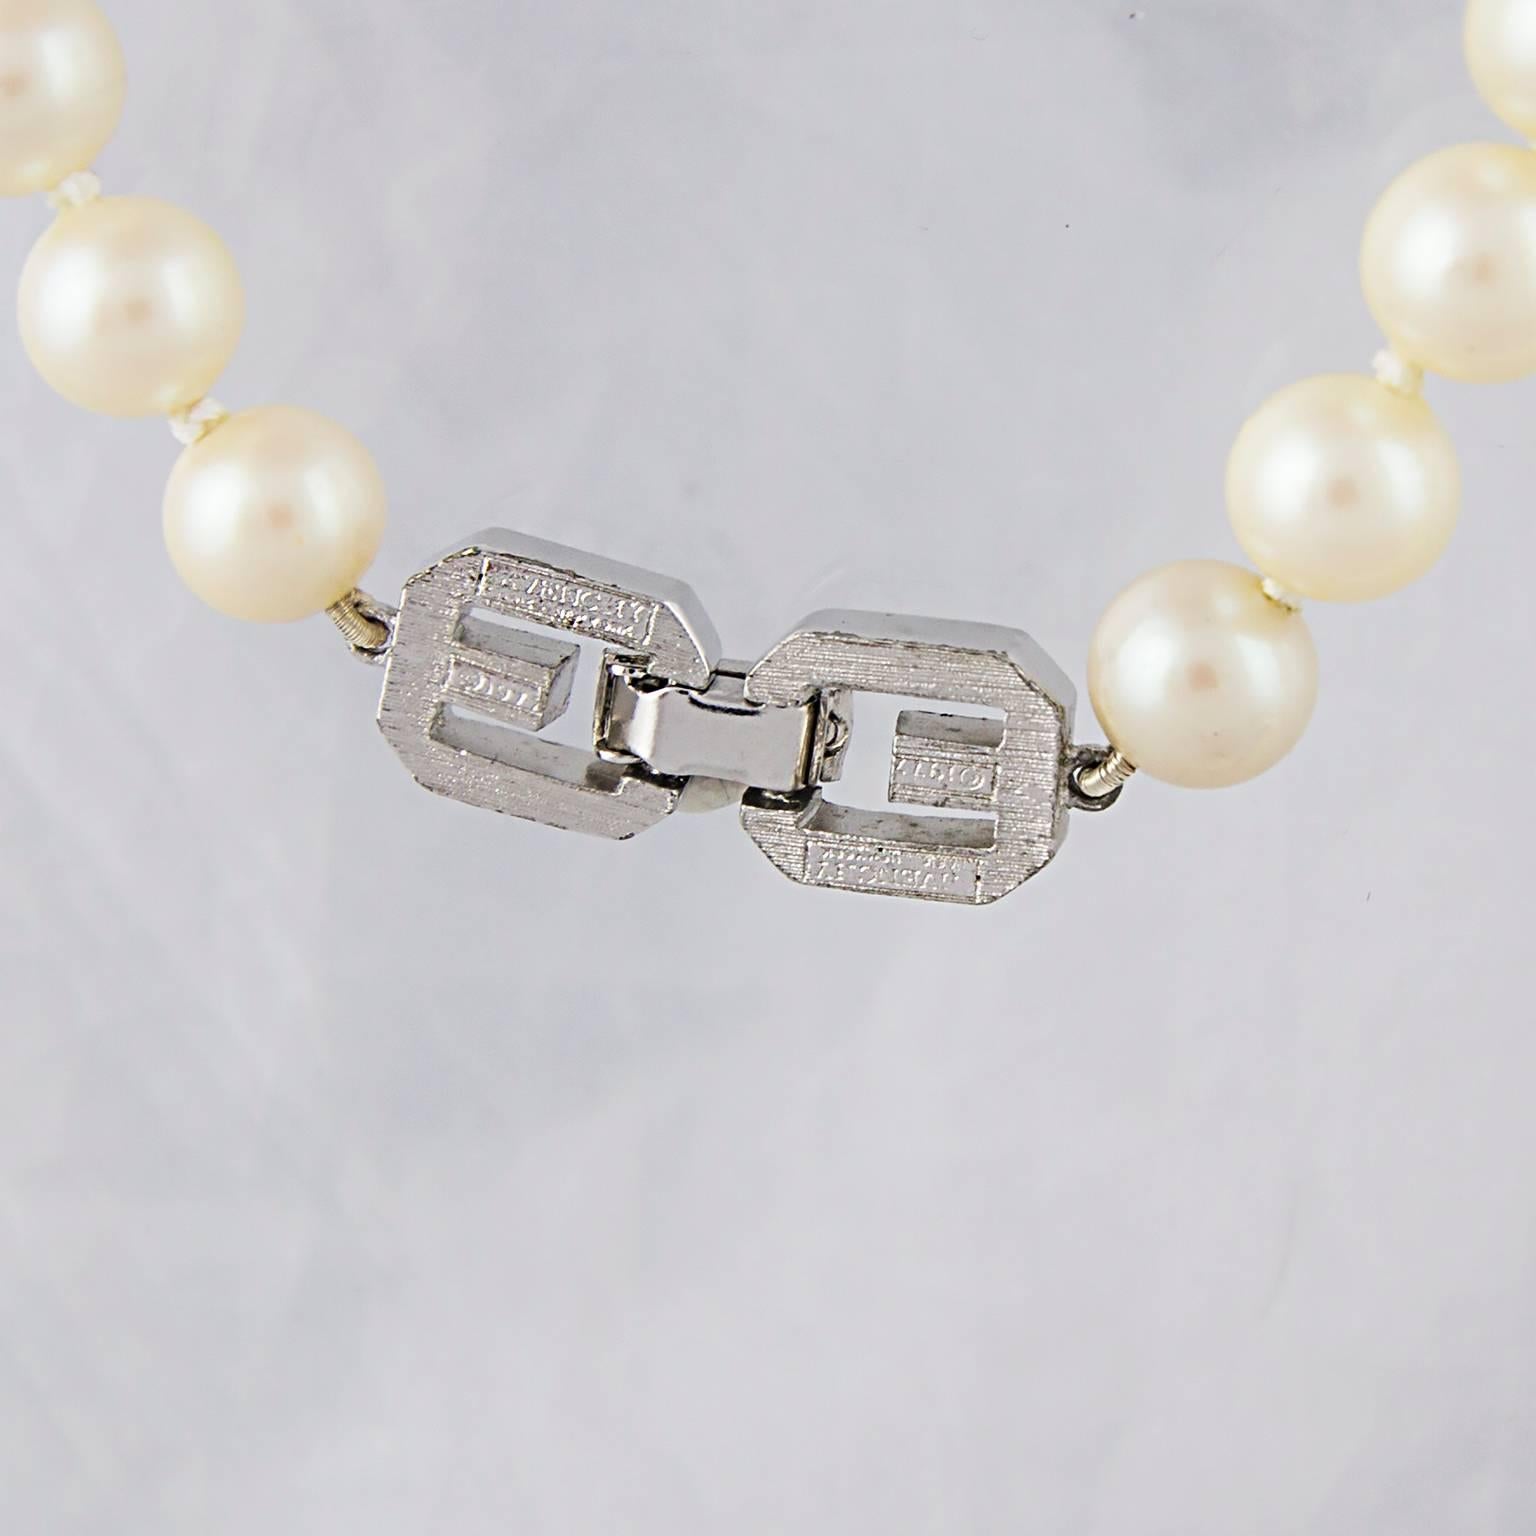 A long Givenchy faux pearl necklace with crystal GG clasp.
Very elegant in the Art Deco Gatsby style.
Made in the 1990's.
Fully signed. 
In a perfect condition. 
Don't hesitate to contact us with any queries or image requests.